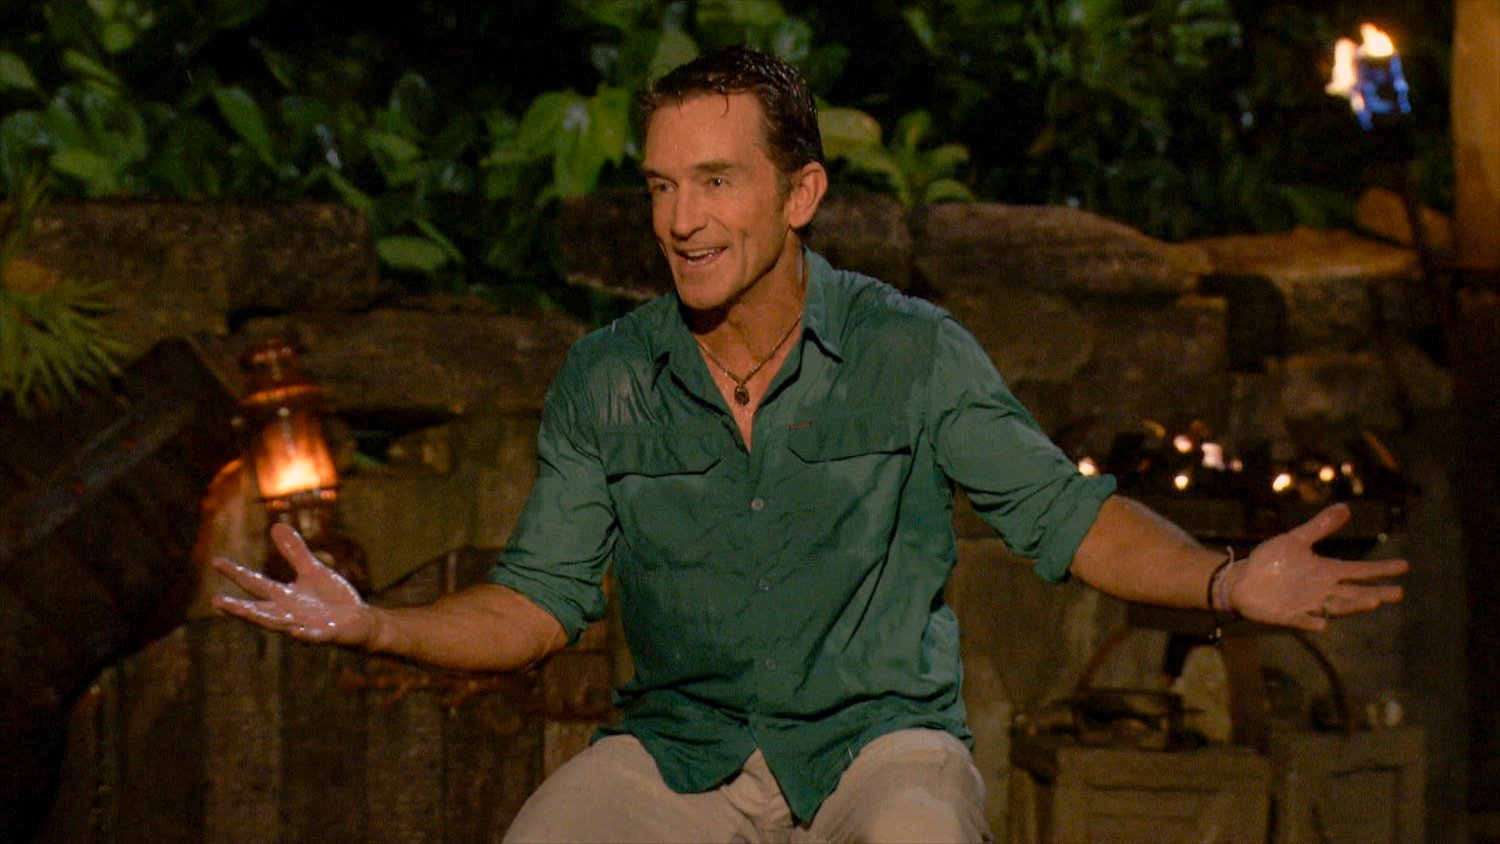 Jeff Probst at Tribal Council on the three-hour season finale episode of SURVIVOR: WINNERS AT WAR, airing Wednesday, May 13th (8:00-11:00 PM, ET/PT) on the CBS Television Network. Image is a screen grab.